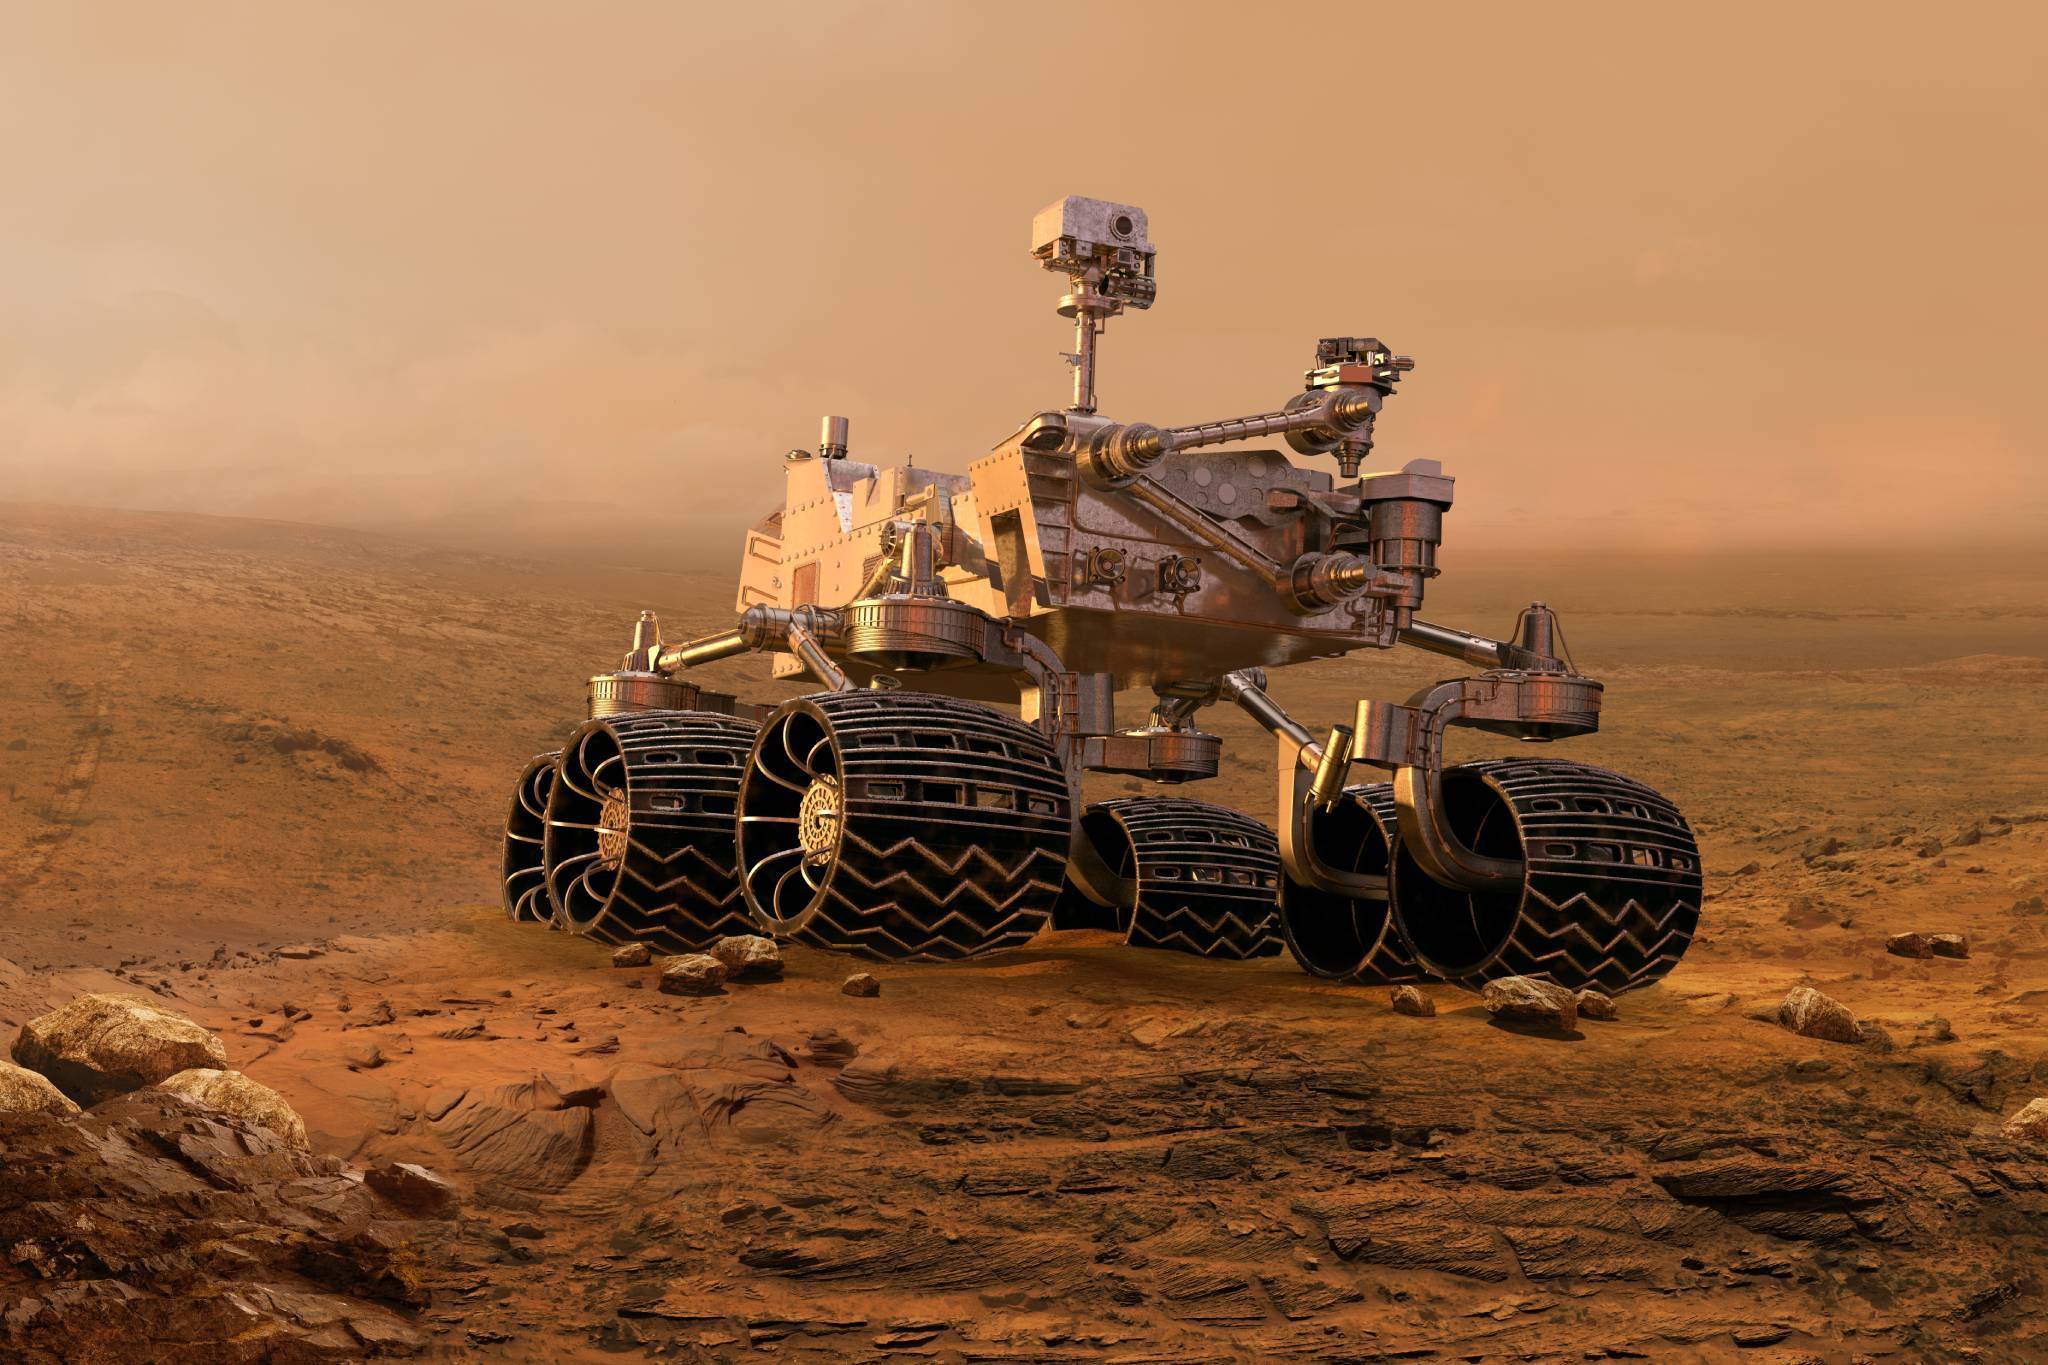 NASA will launch rover Perseverance into space to investigate whether